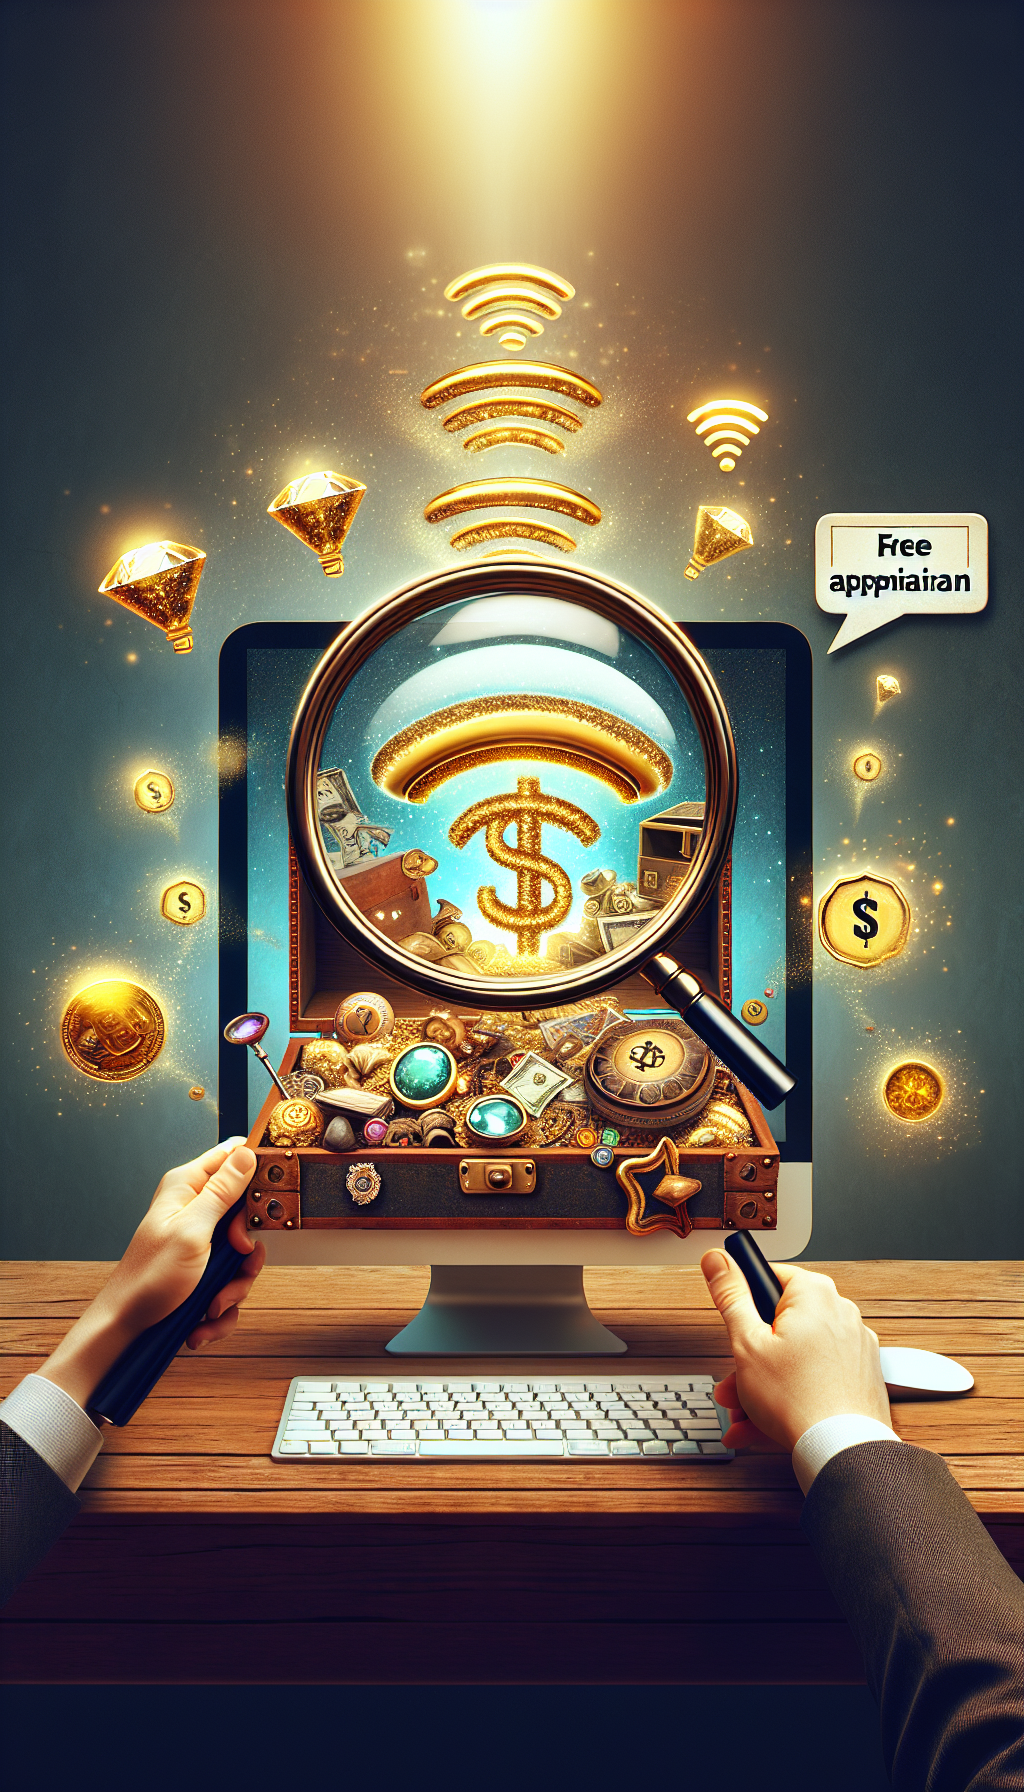 A whimsical digital illustration features a magnifying glass peering into a computer screen, which morphs into a treasure chest brimming with antiques and jewels. Among the treasures, golden coins display wifi signals, symbolizing online appraisals. To the side, a chat bubble contains a dollar sign, hinting at the potential value, with the screen's corner tagged "FREE Appraisal".